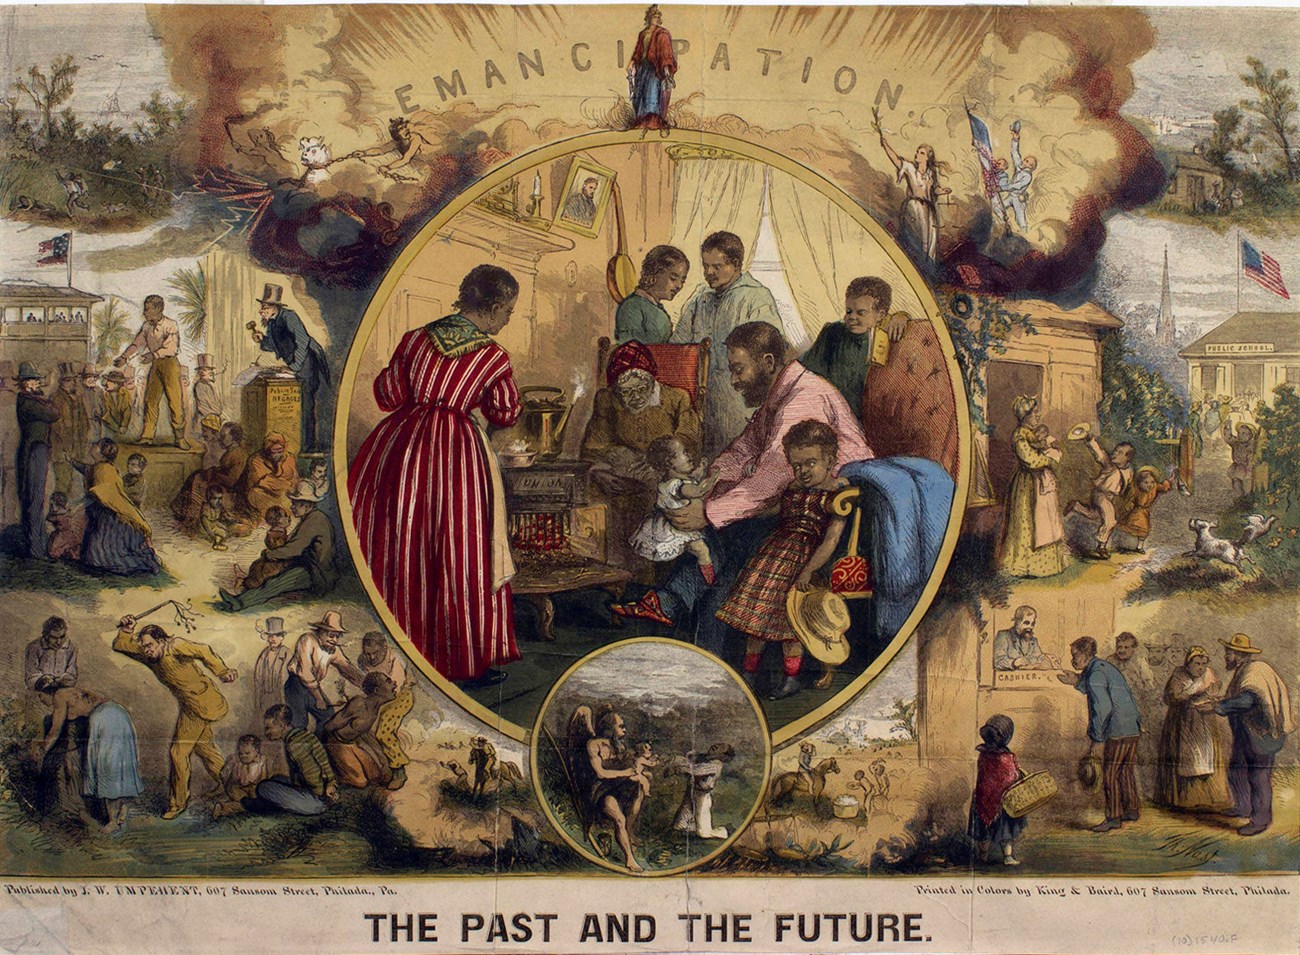 painting of a African American family during Reconstruction.